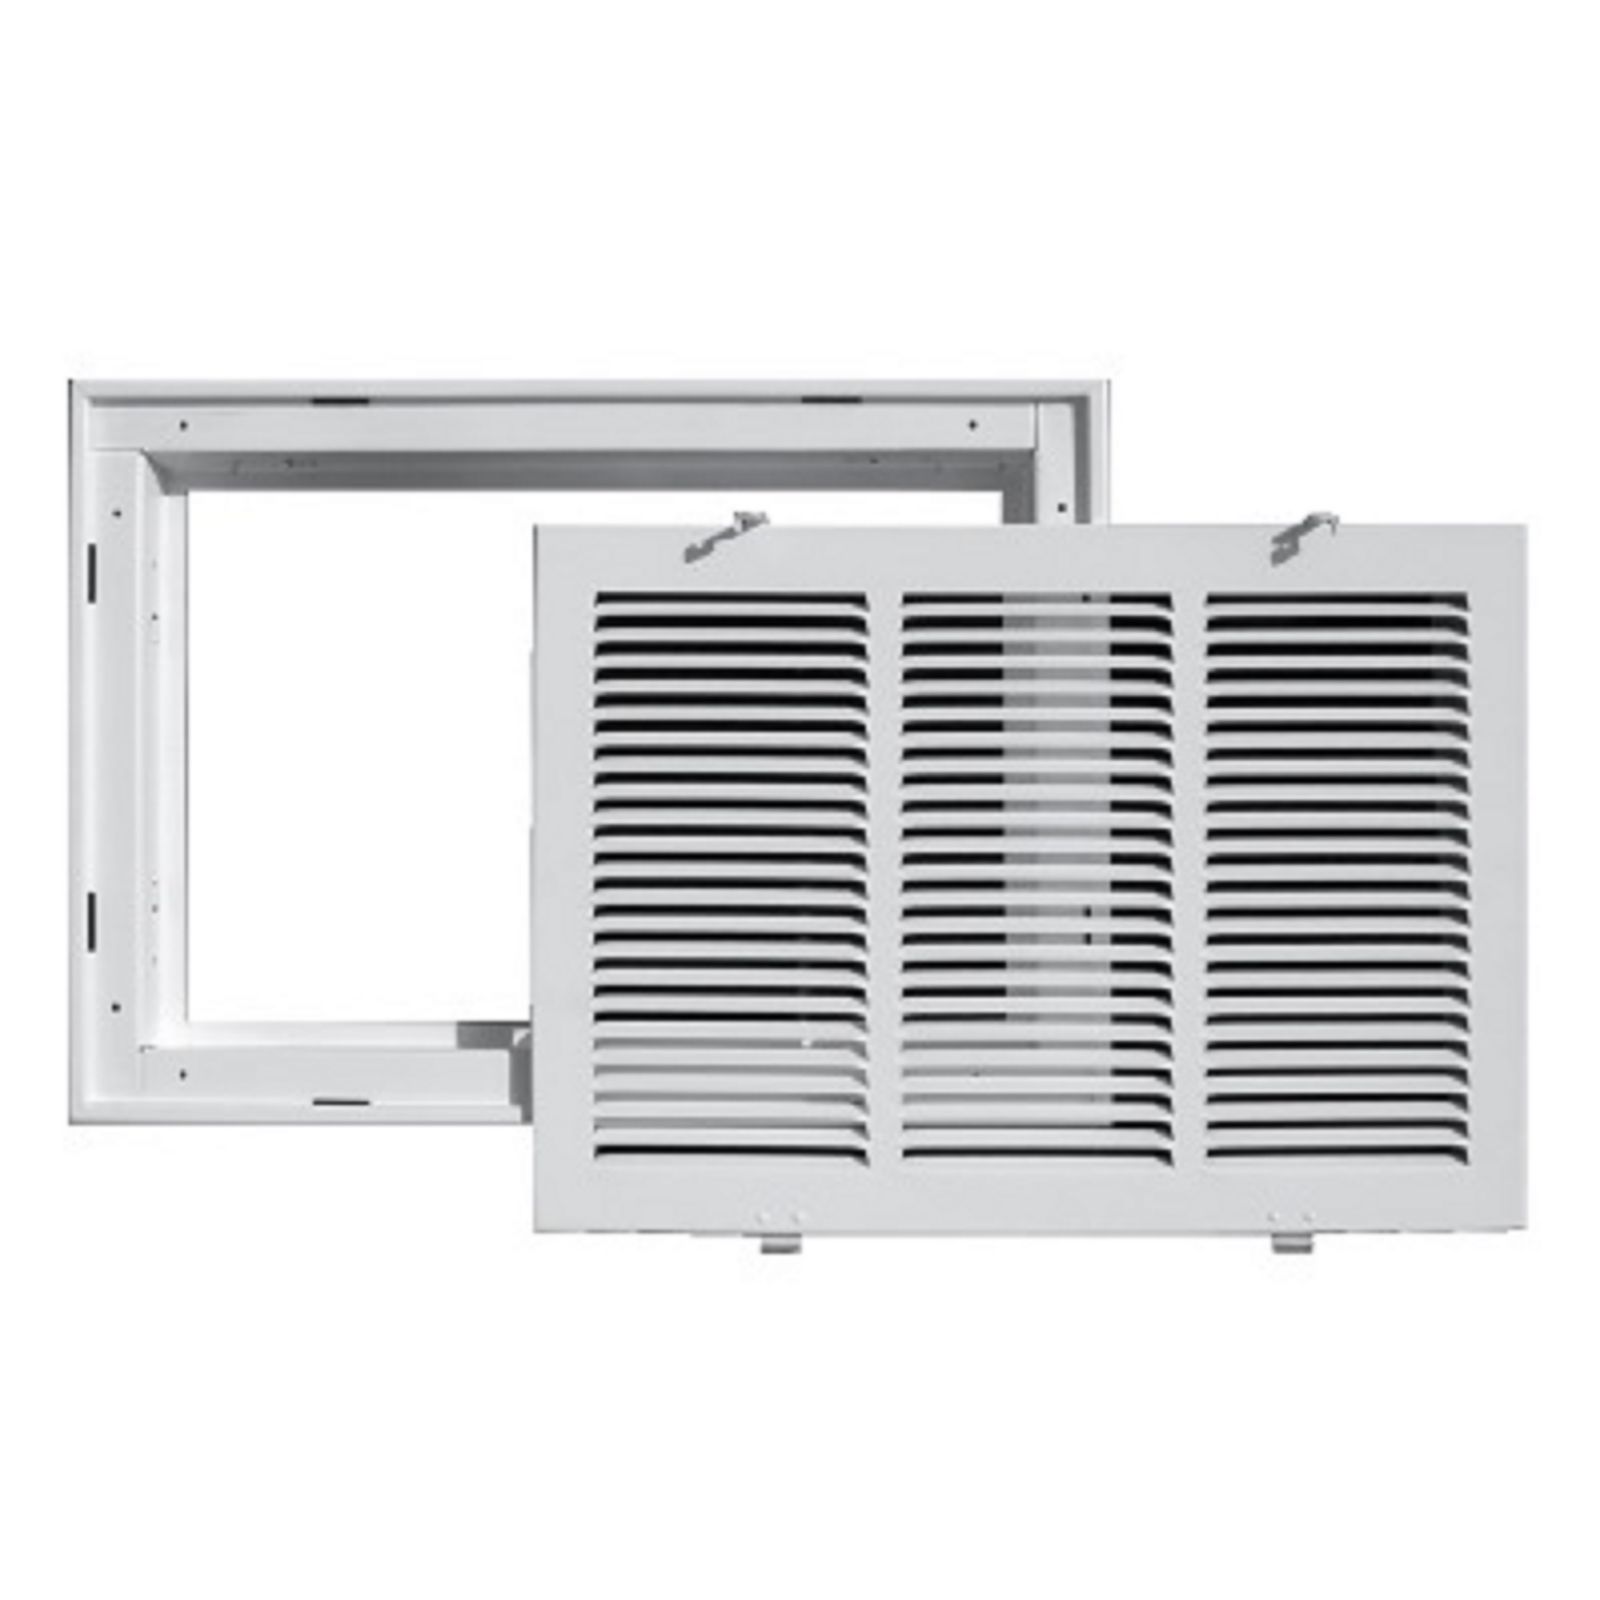 TRUaire 190RF 30X14 - Steel Return Air Filter Grille With Removable Face, White, 30" X 14"